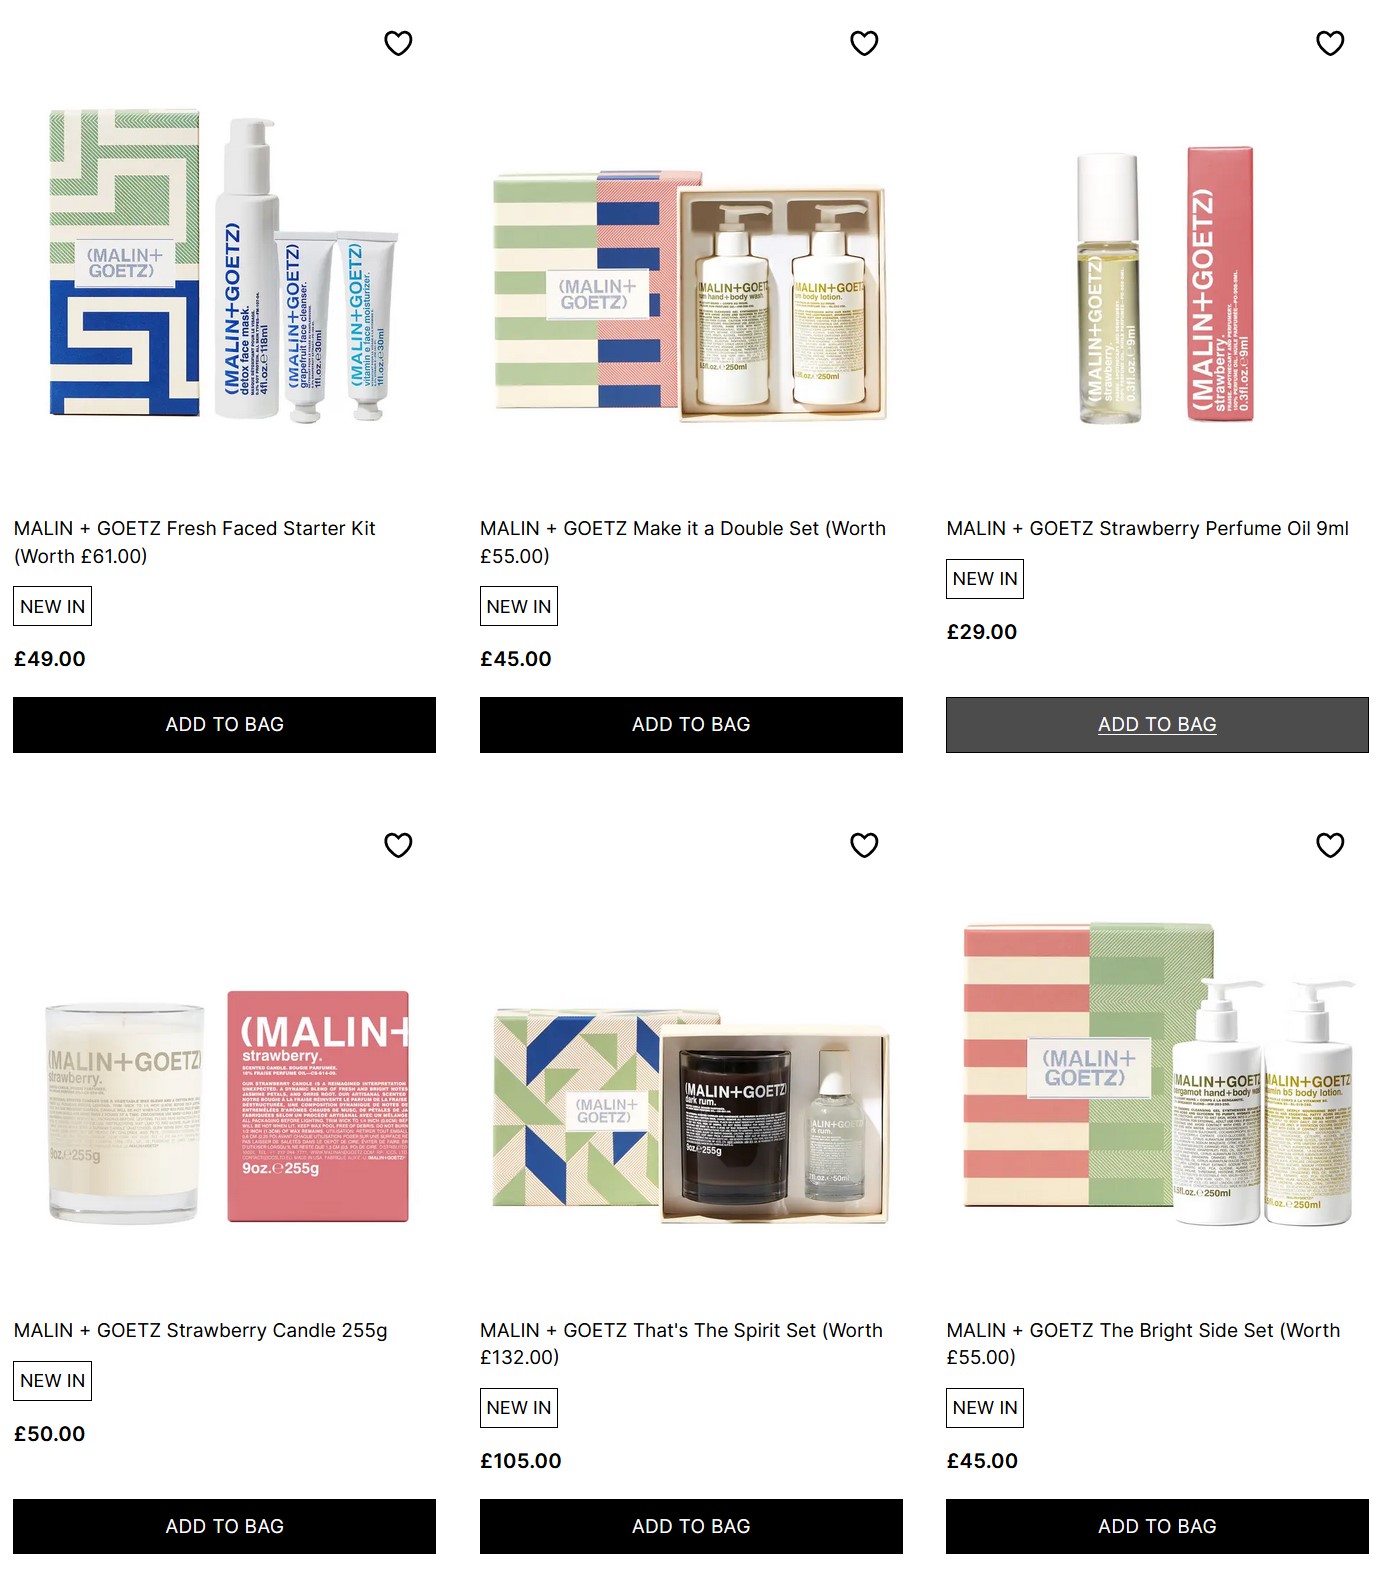 15% off MALIN + GOETZ Holiday Collection at Cult Beauty